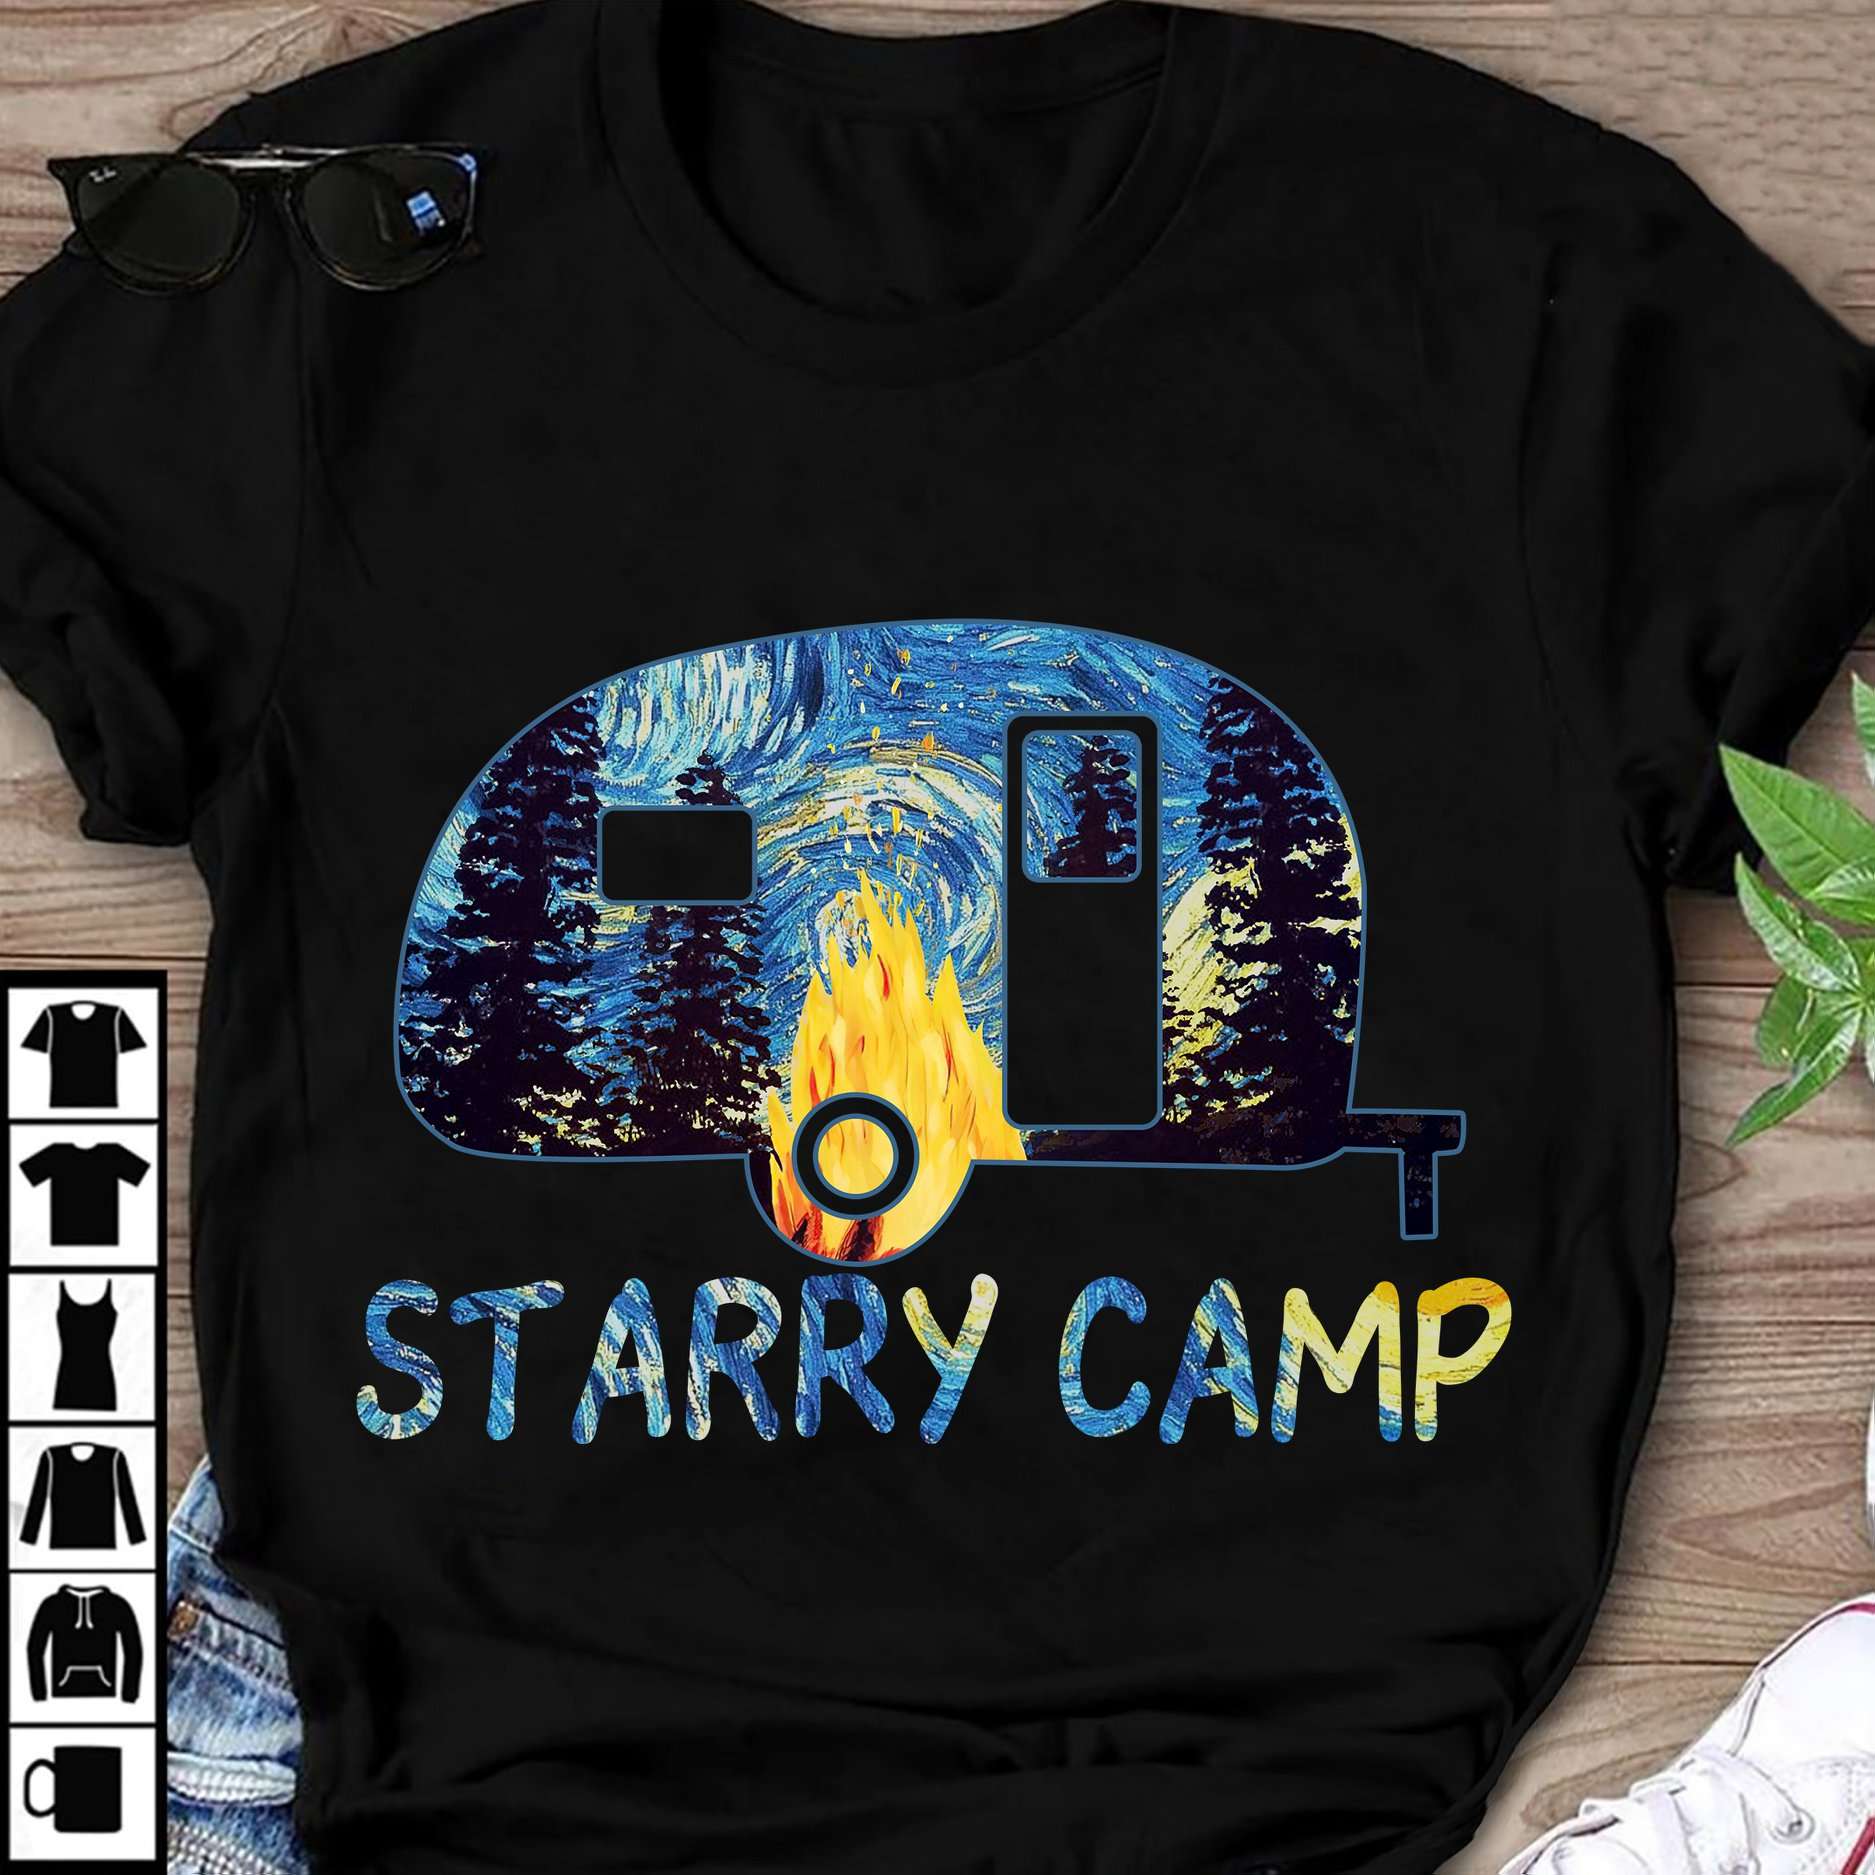 Starry camp - Starry night, camping art of Vincent van Gogh